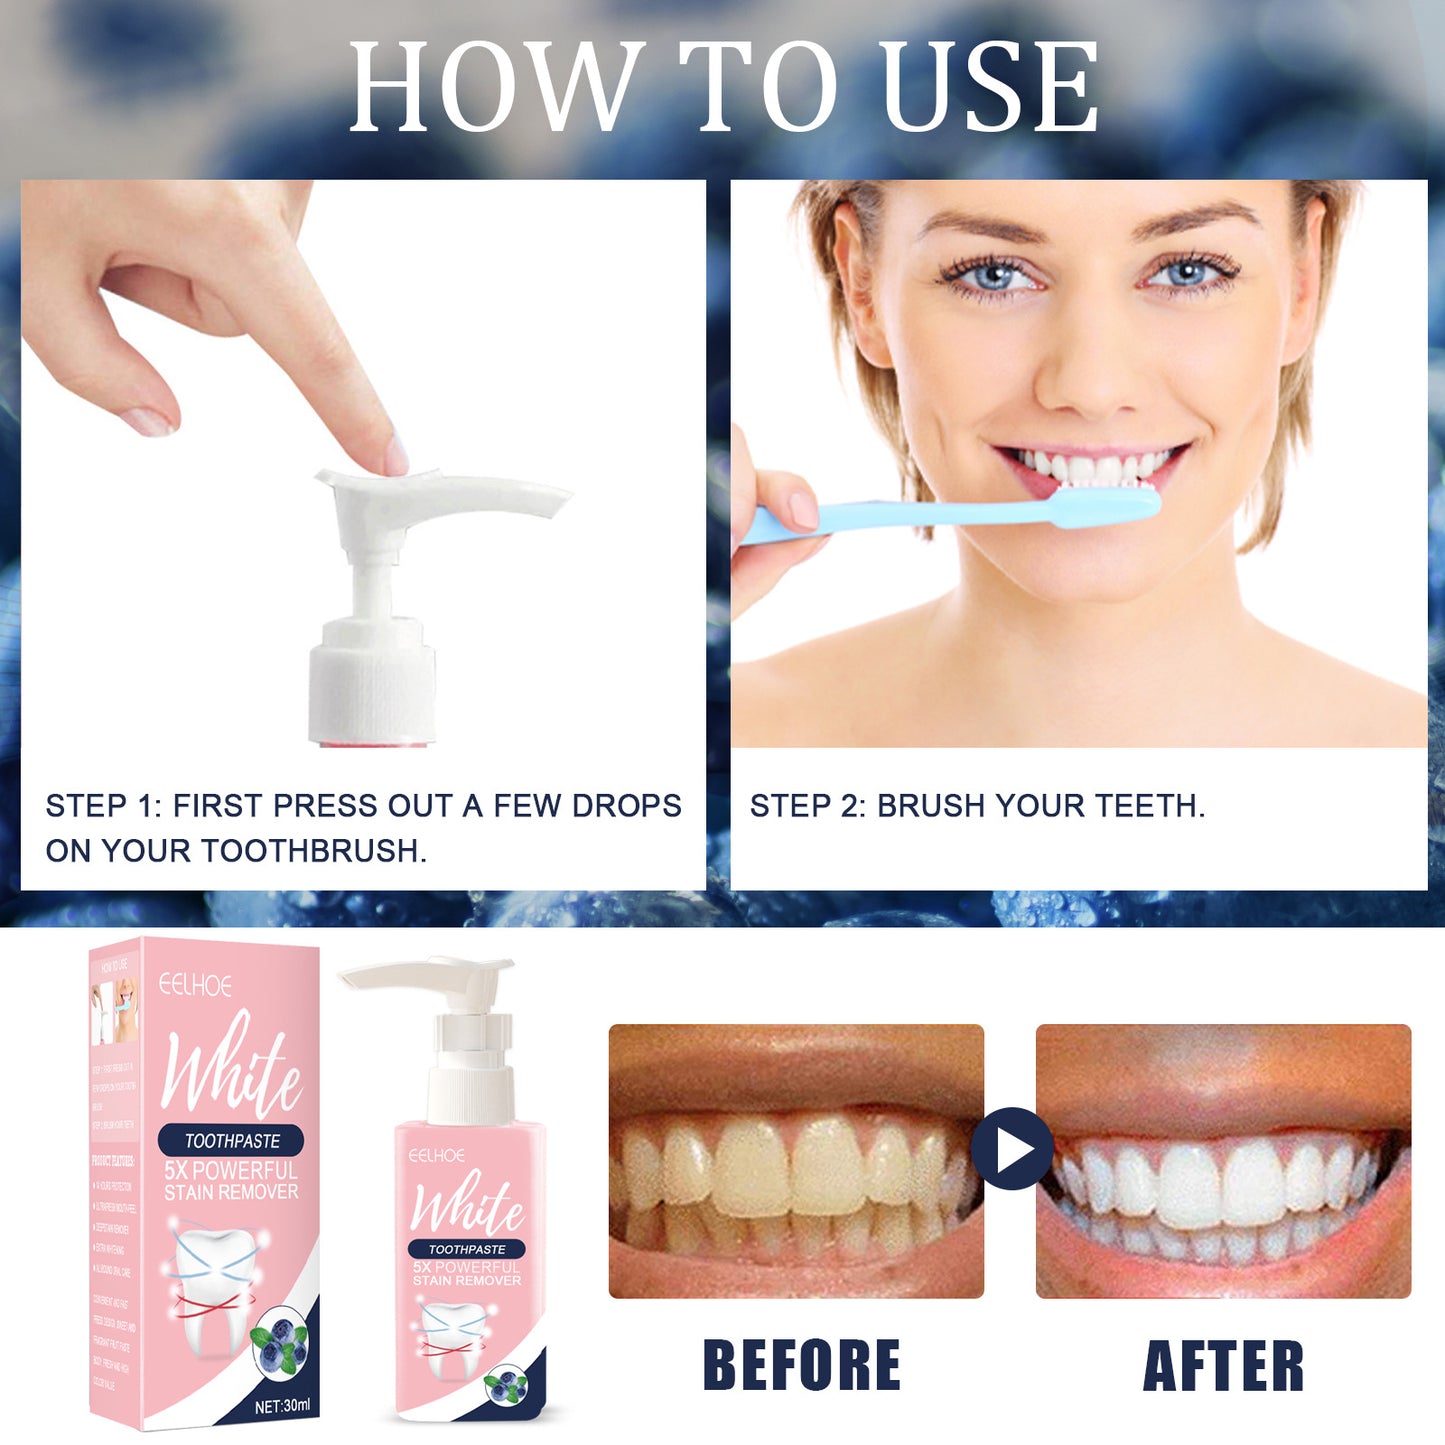 EELHOE 100ML Whitening Toothpaste For Teeth Anti-Cavity Four Fruit Flavor Toothpastes